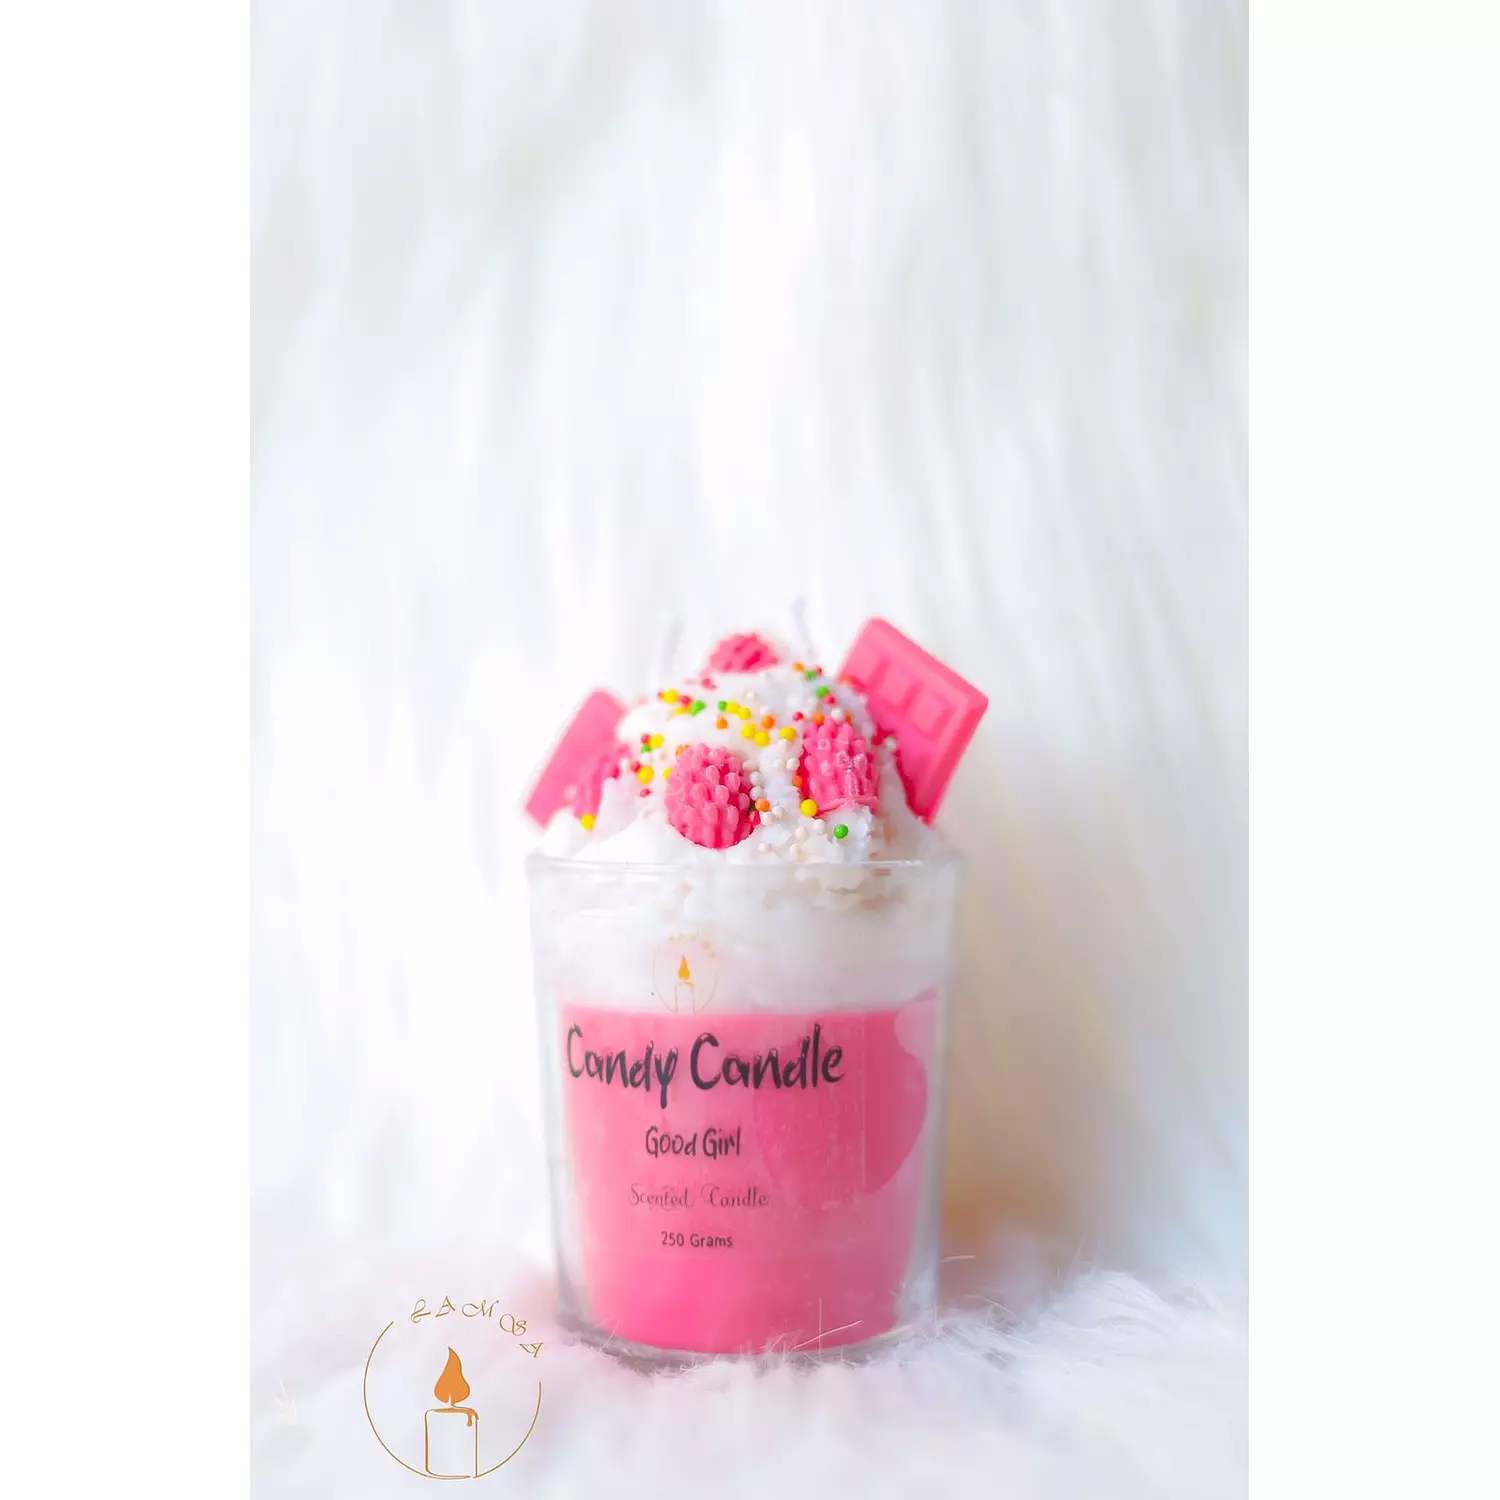 Candy Candle hover image